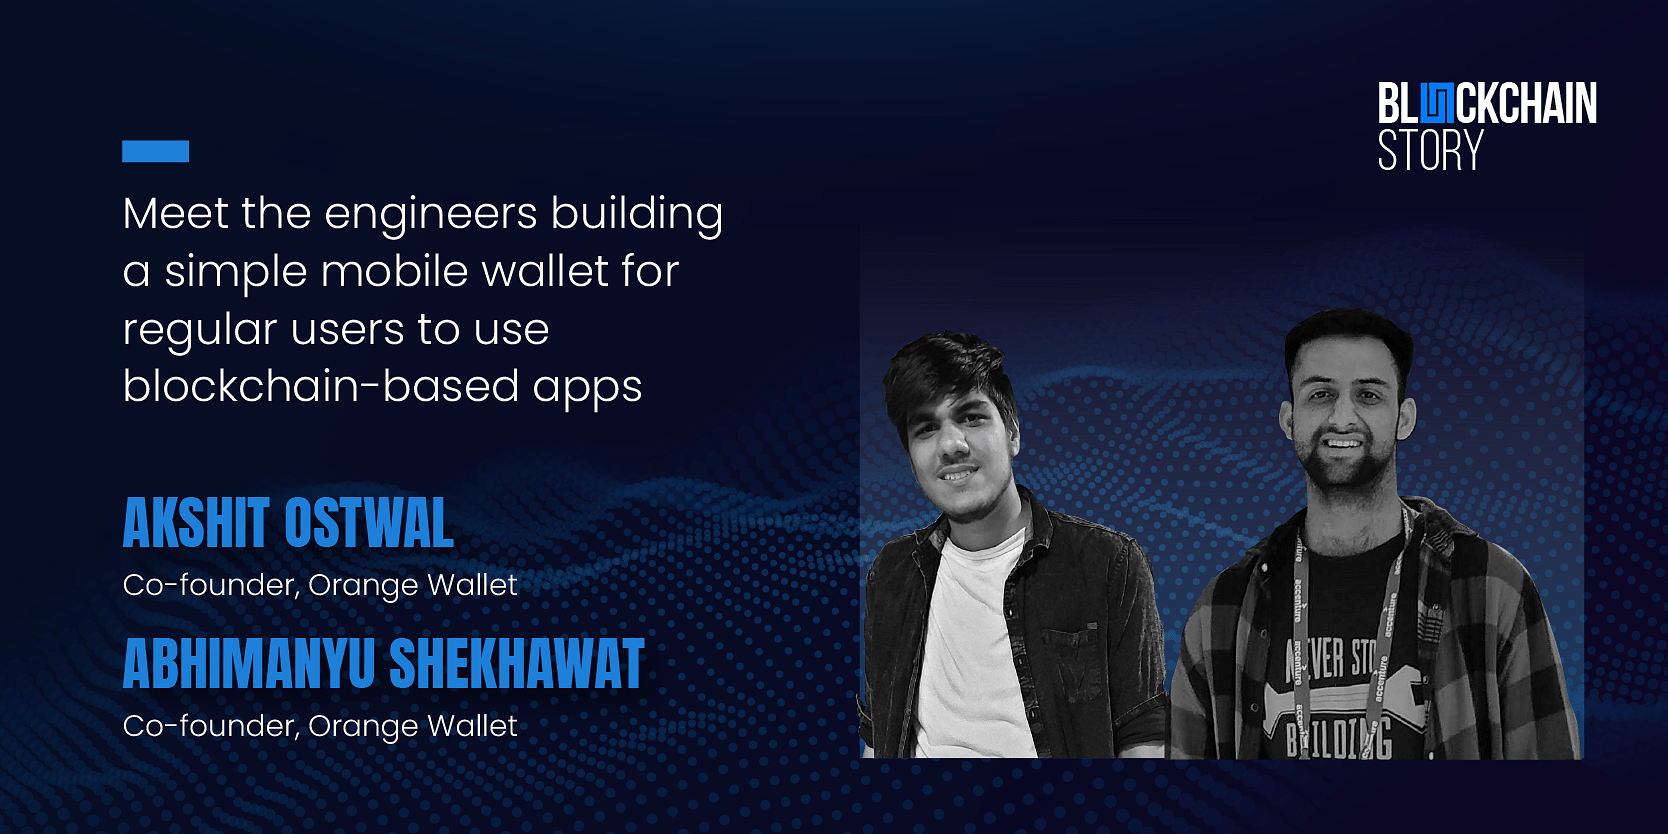 You are currently viewing Meet the engineers building a simple mobile wallet for using blockchain-based apps